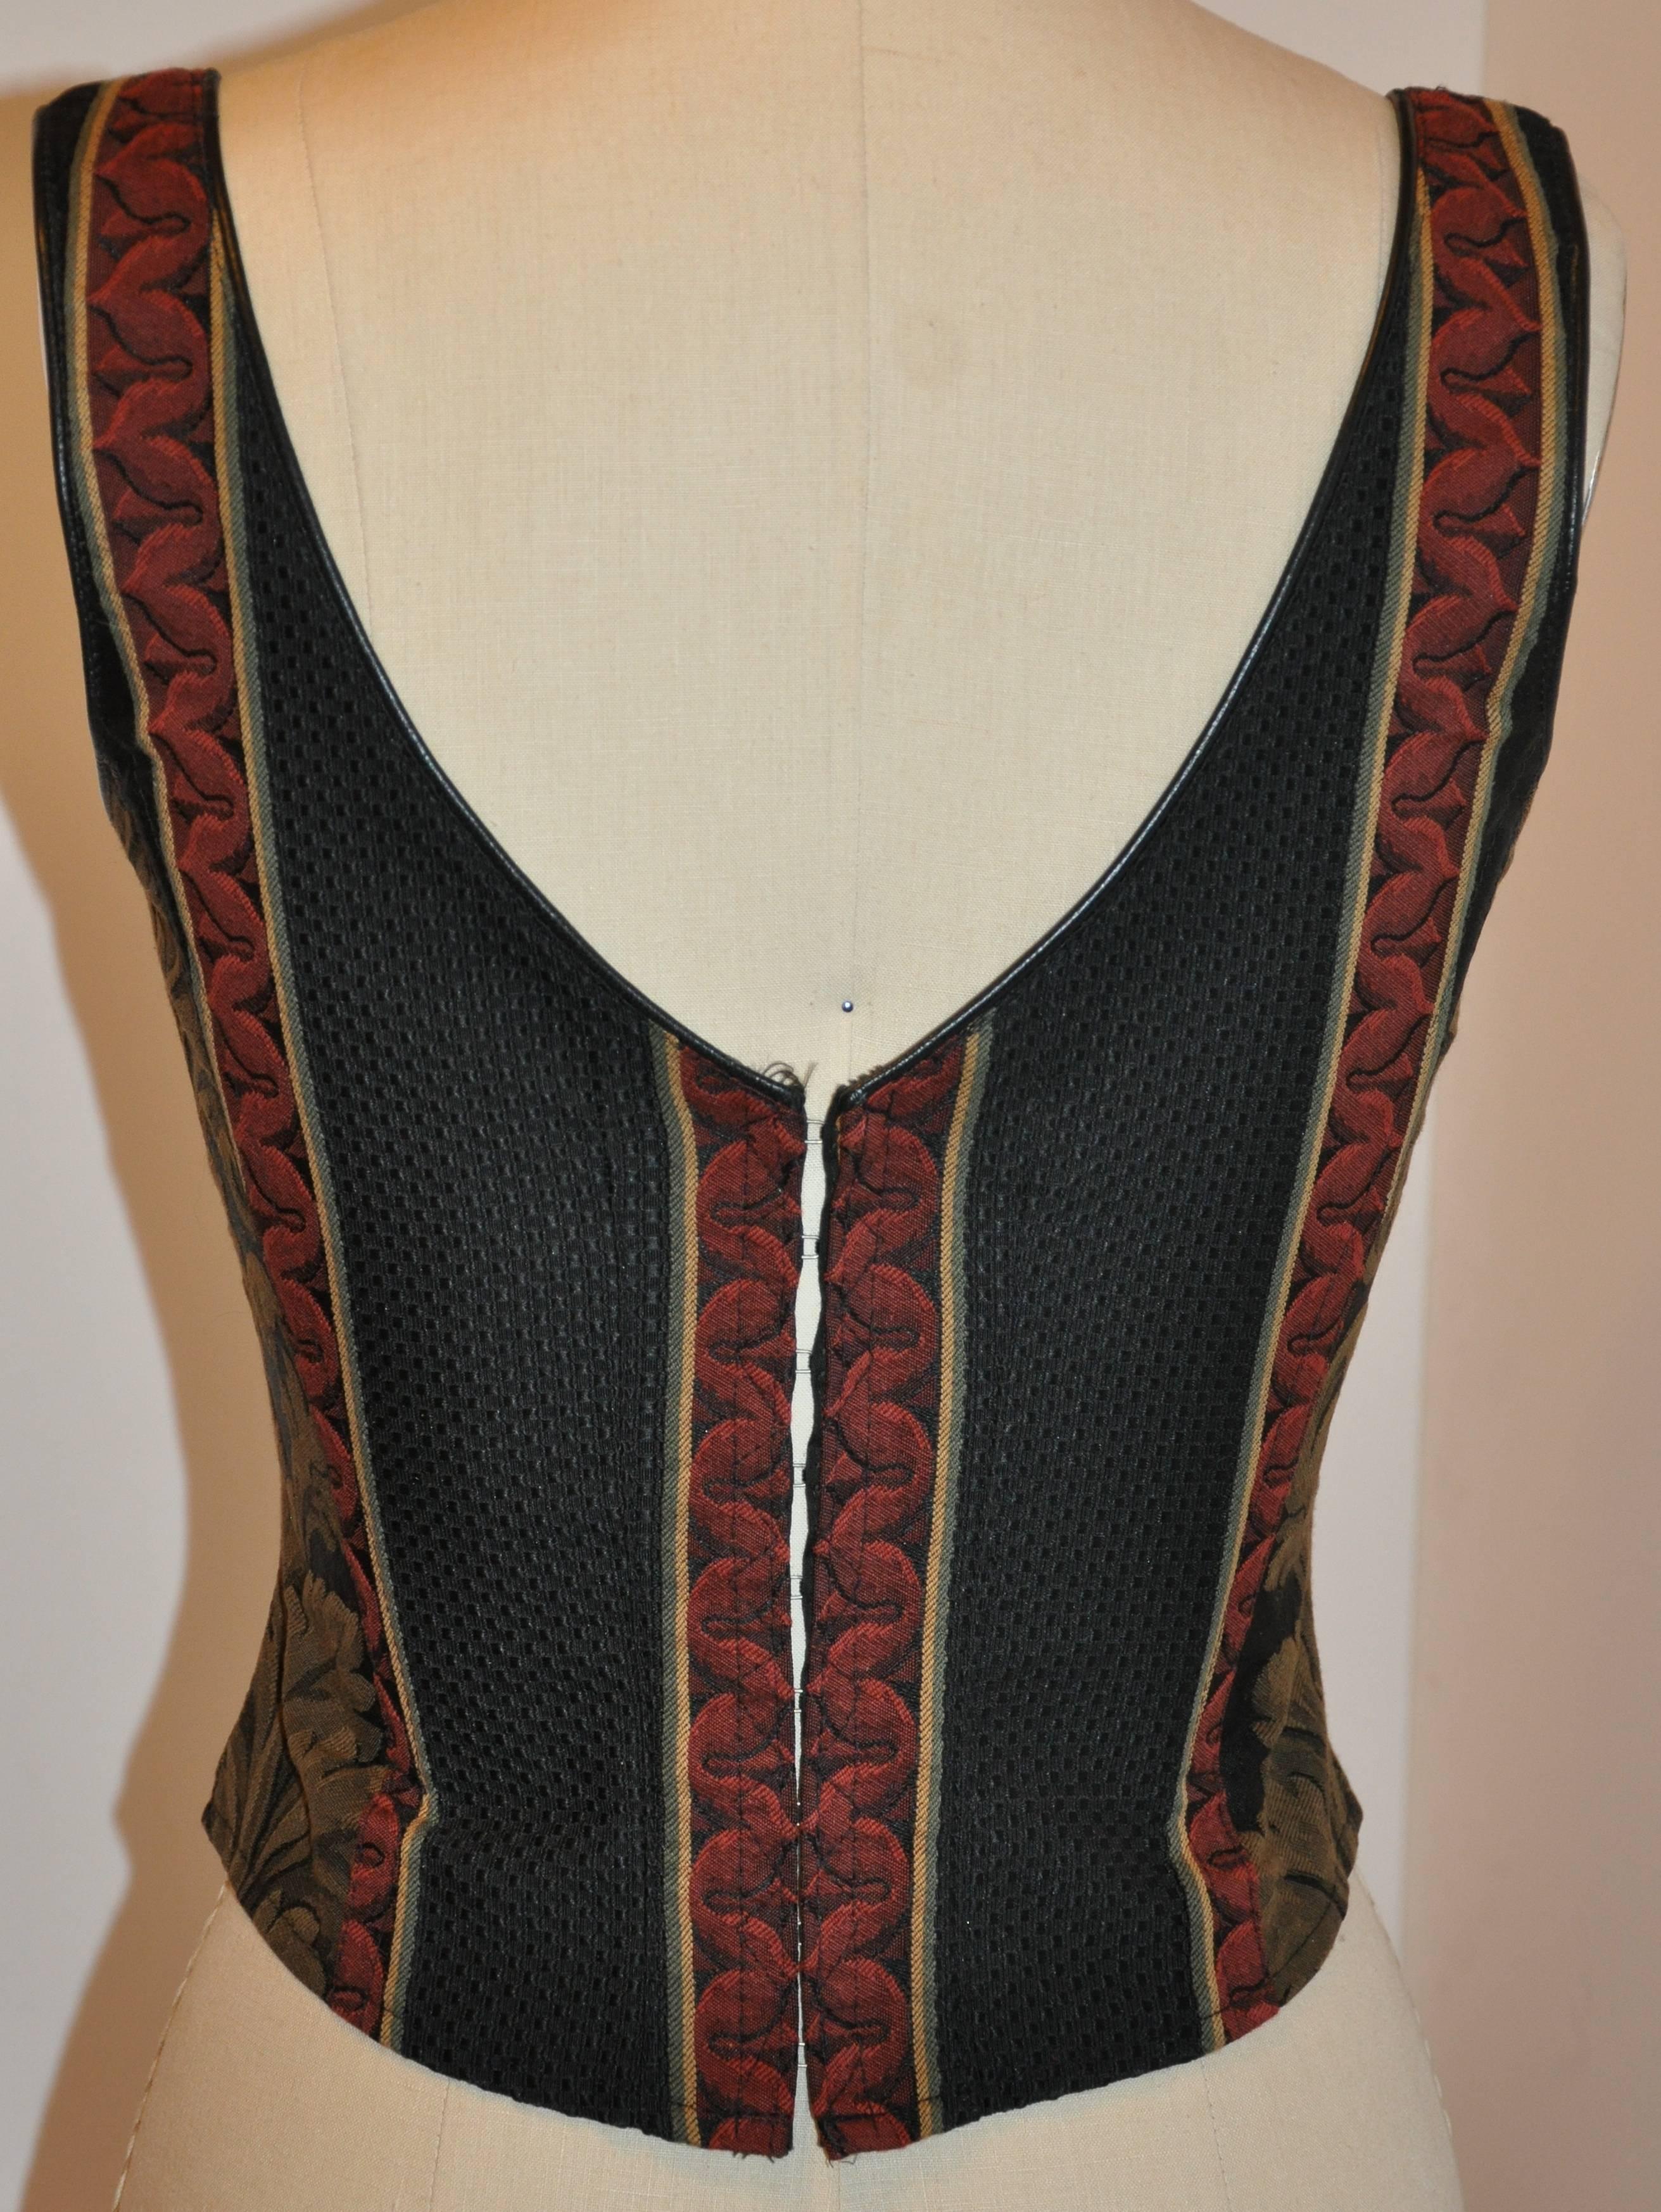        Gigi Clark's wonderfully detailed multi-color corset has a adjustable lace-up front with a row of 15 eyelet accented with a black silk cord. The back is accented with a row of 9 hook and eye with black lambskin leather edge finish throughout